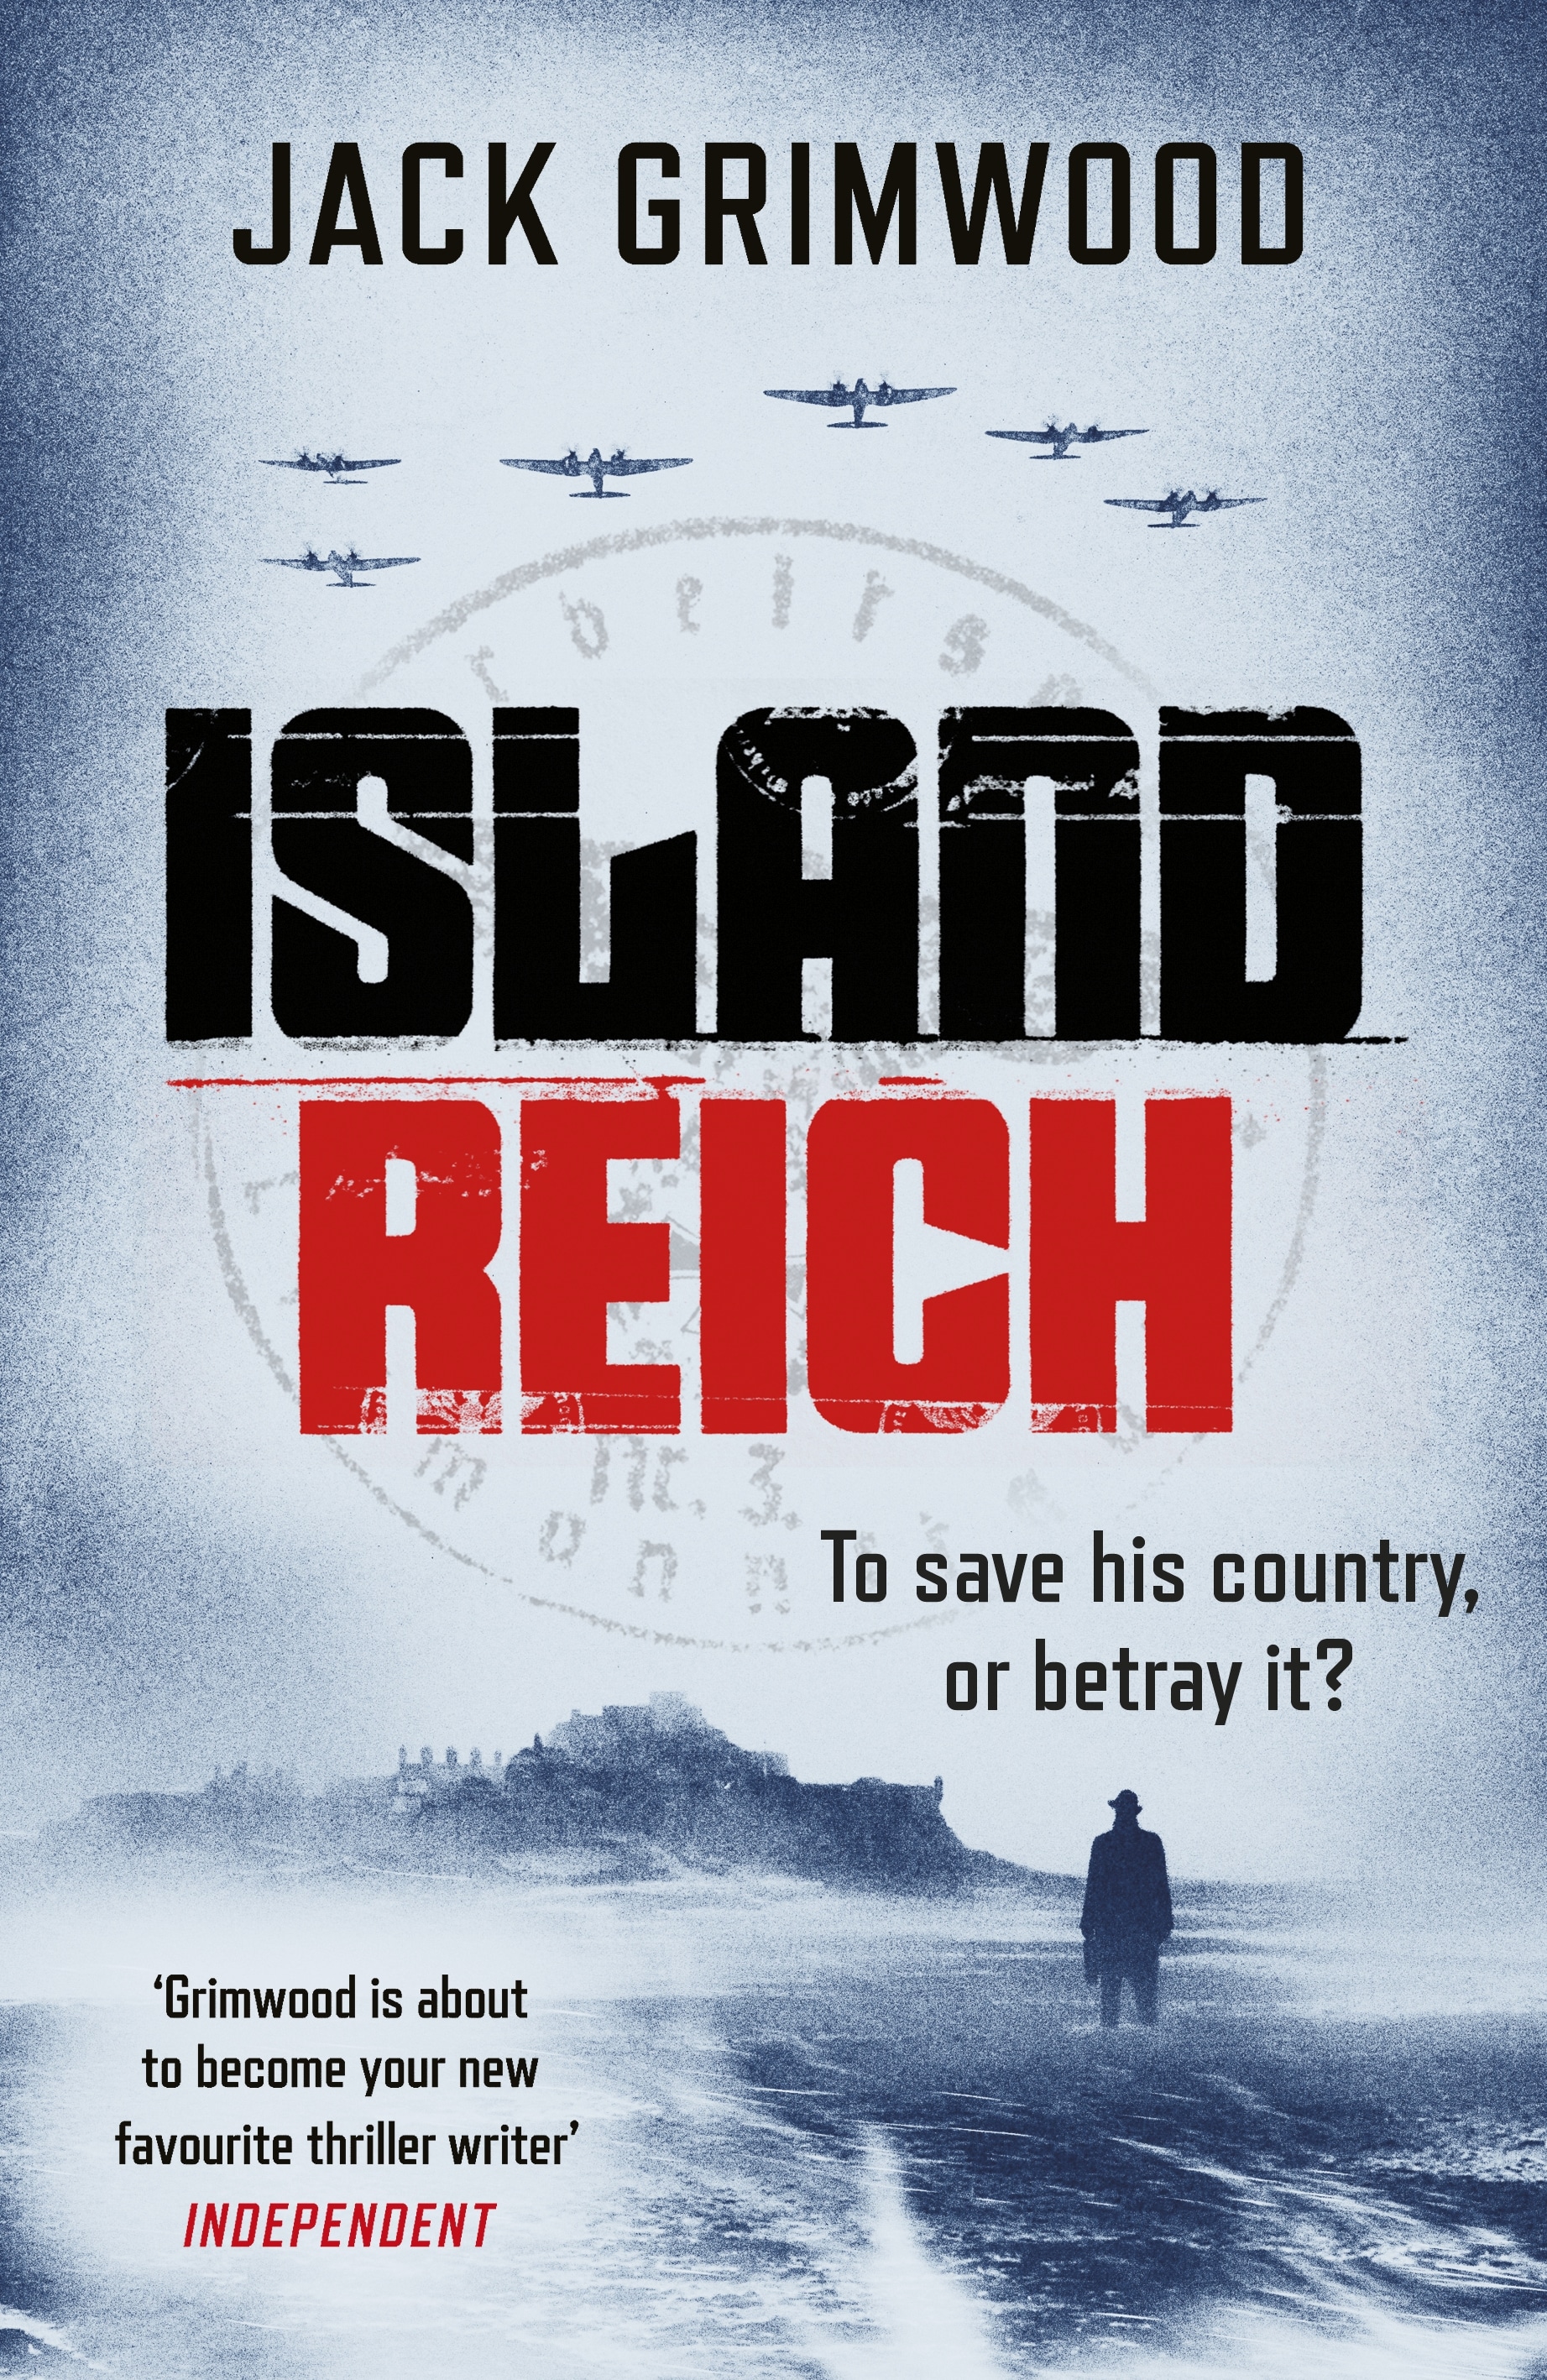 Book “Island Reich” by Jack Grimwood — May 27, 2021